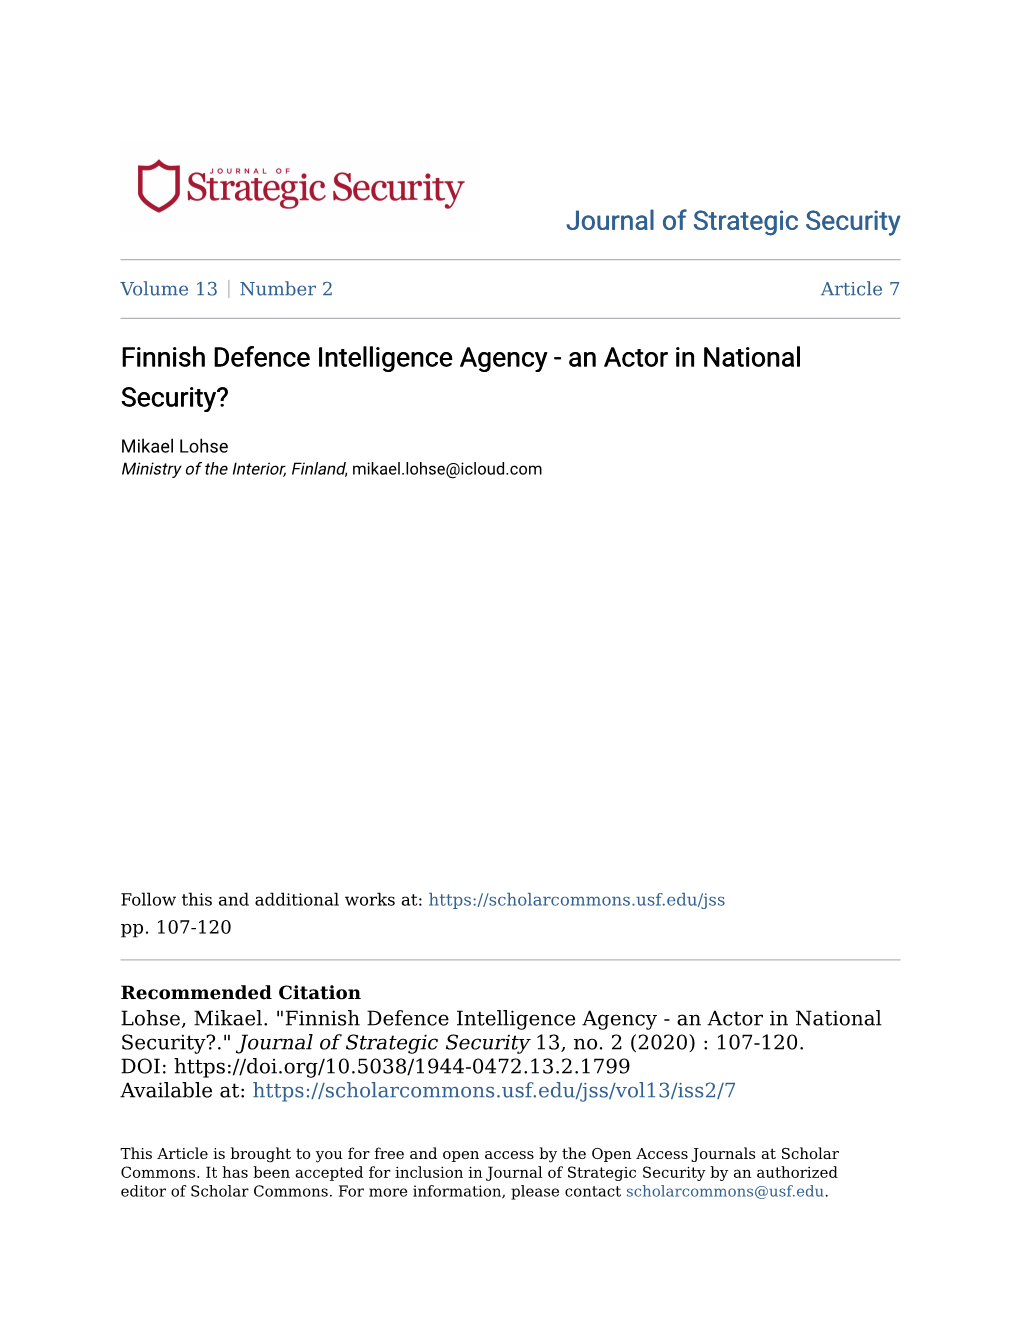 Finnish Defence Intelligence Agency - an Actor in National Security?